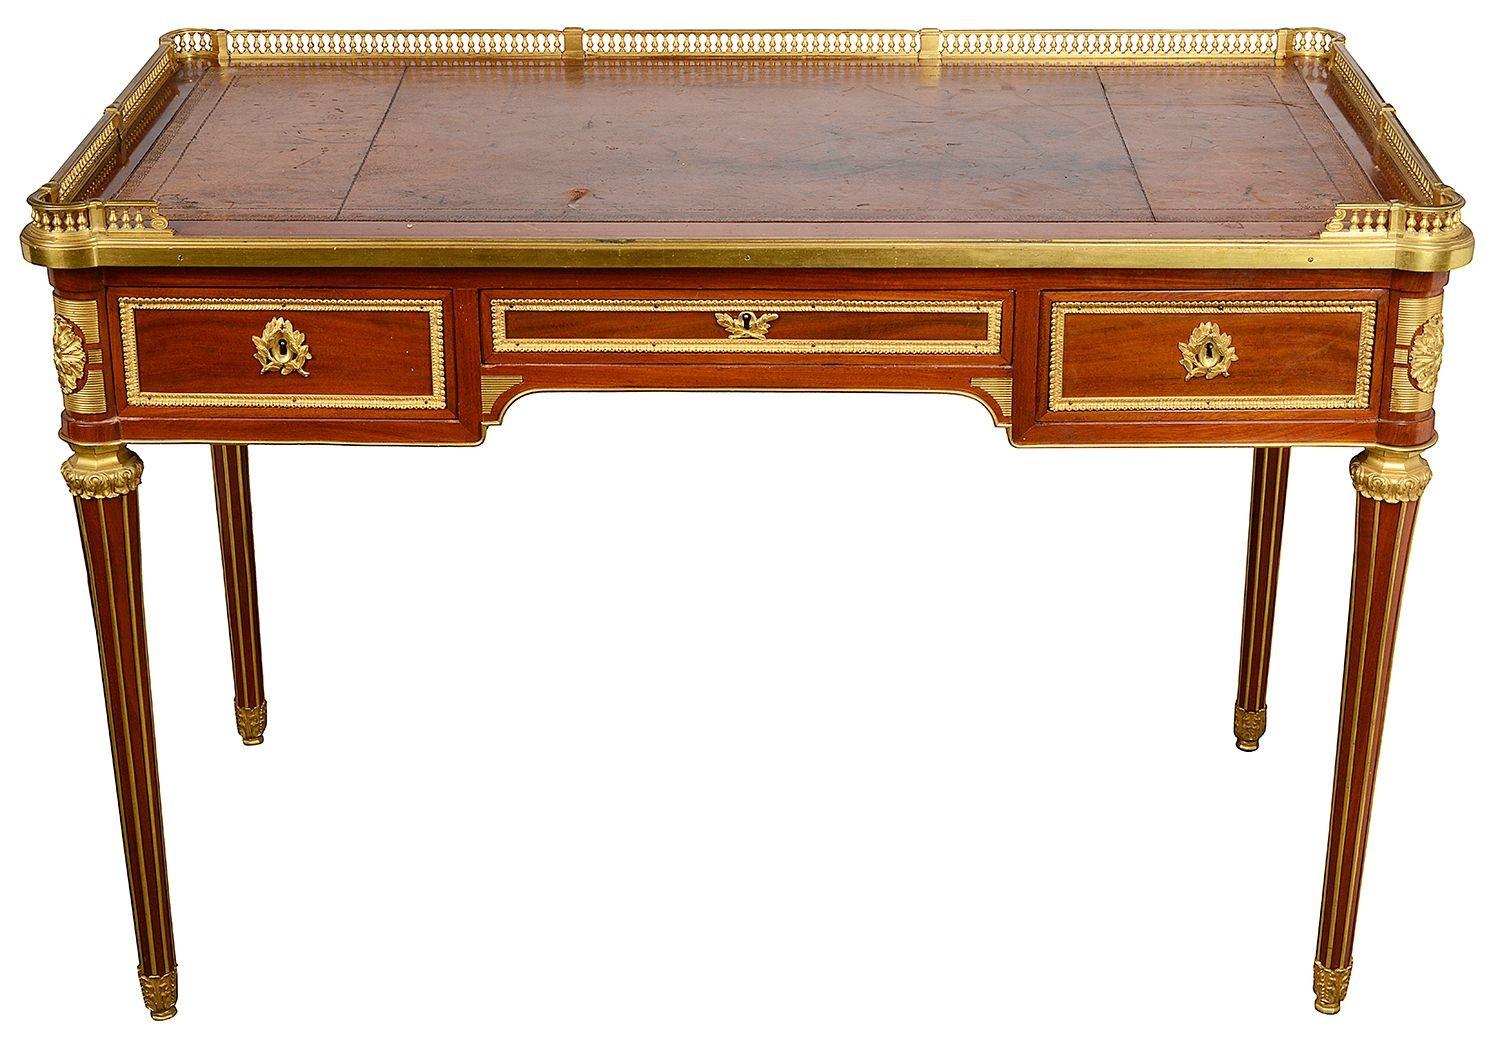 A fine quality late 19th century French Mahogany Bureau plat, after Henry Dasson, having an inset leather top with a three quarter ormolu gallery, three Mahogany line freize drawers, each with gilded ormolu ring drop handles, ormolu moldings to the